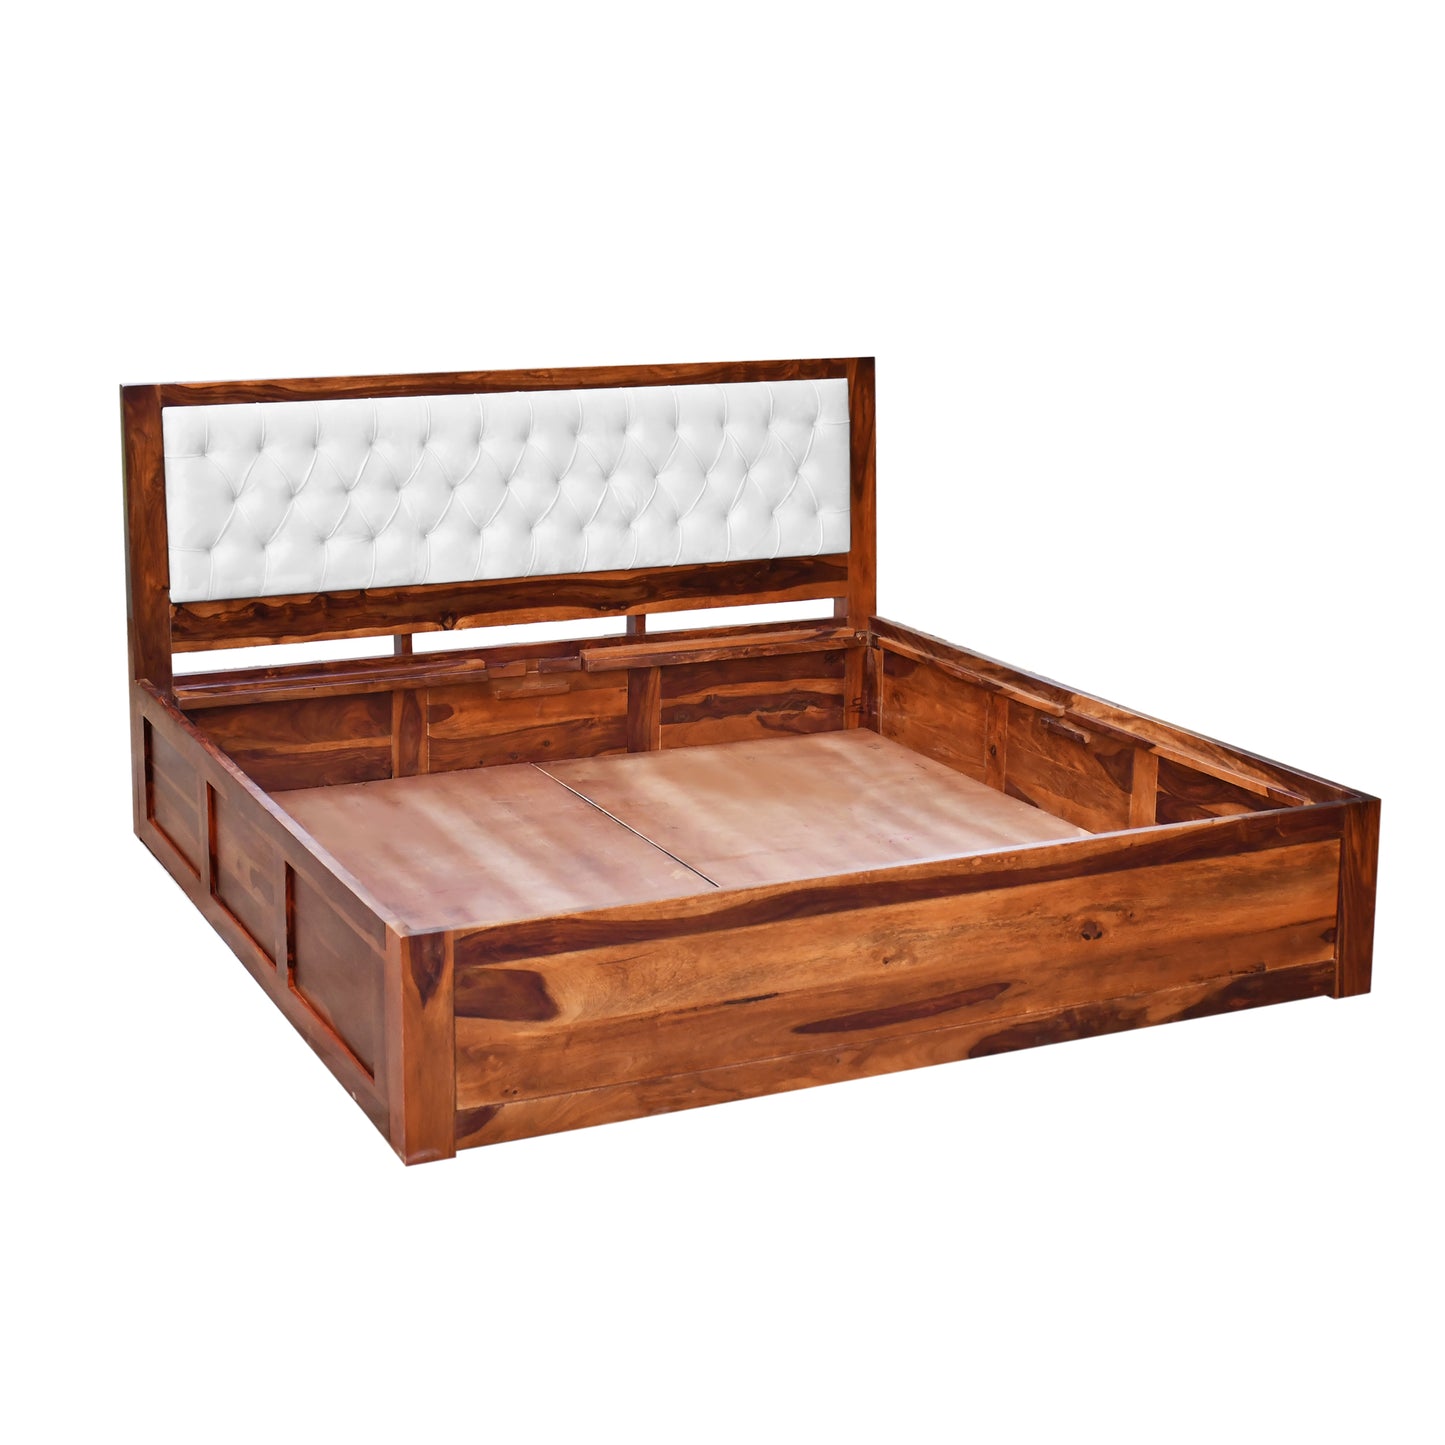 MoonWooden Sheesham Queen Size Bed for Bedroom, Solid Wood Double Bed Cot with Box Storage, Honey Finish